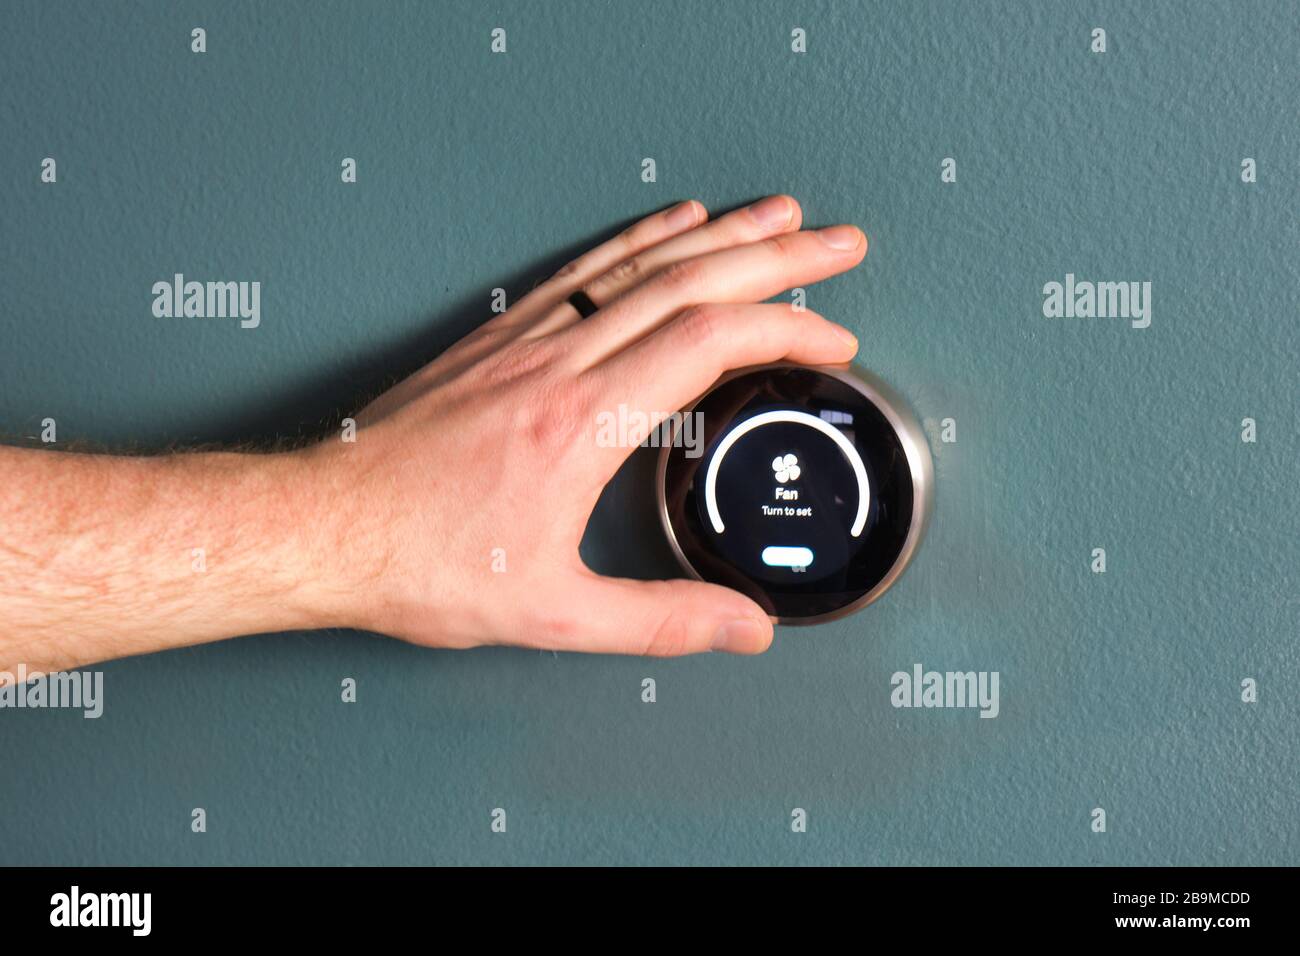 Green tech- Electric thermostat to save money and energy. Hand present to make adjustments. Stock Photo